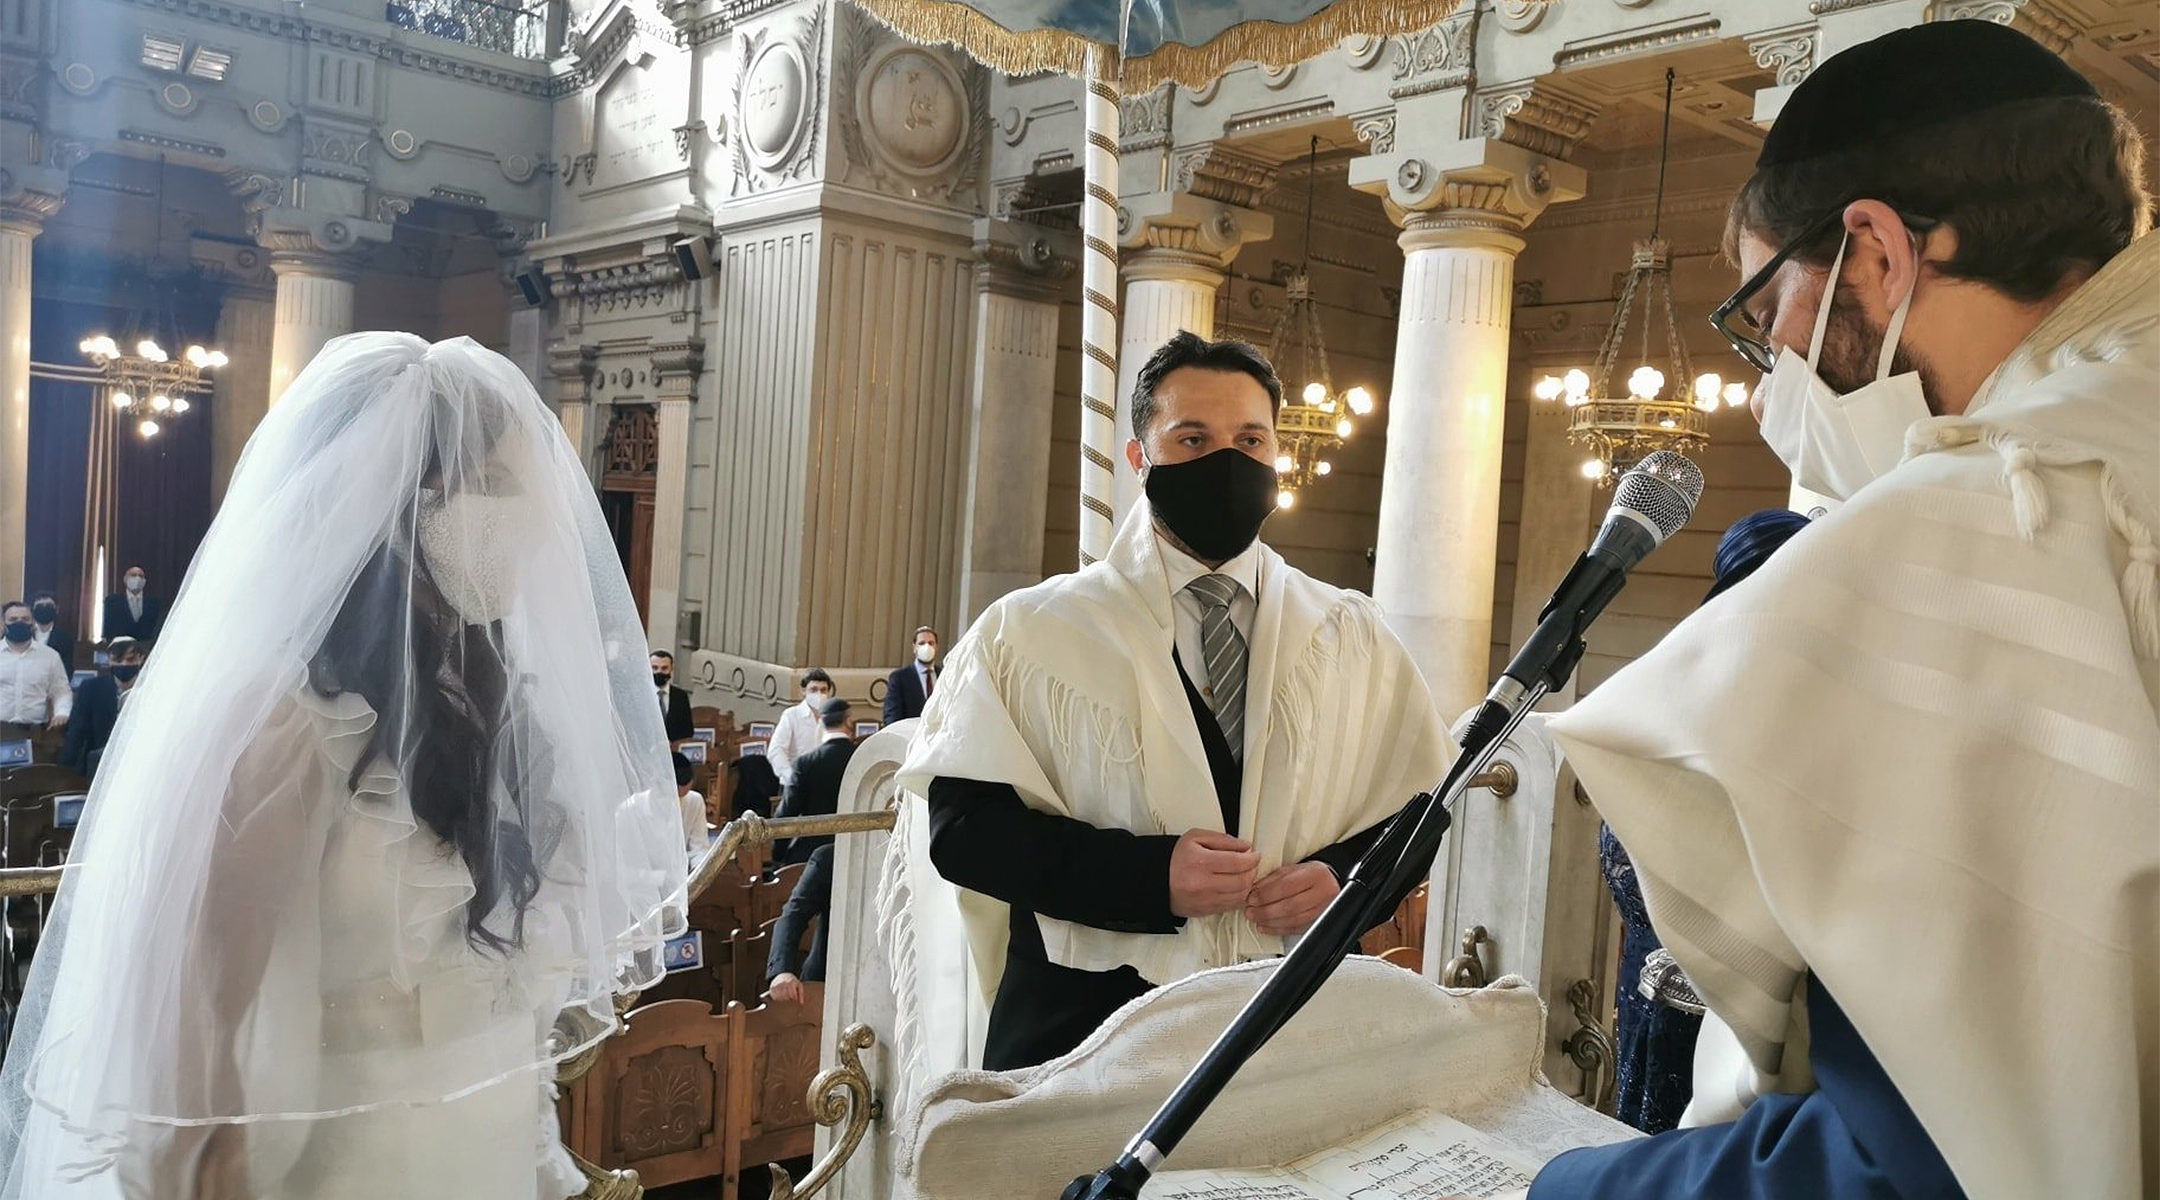 Rabbi Menachem Lazar, right, officiating at the wedding of Marco Del Monte and Elinor Hanoka at the Great Synagogue of Rome, Italy on June 7, 2020. (Courtesy of Chabad Piazza Bologna)